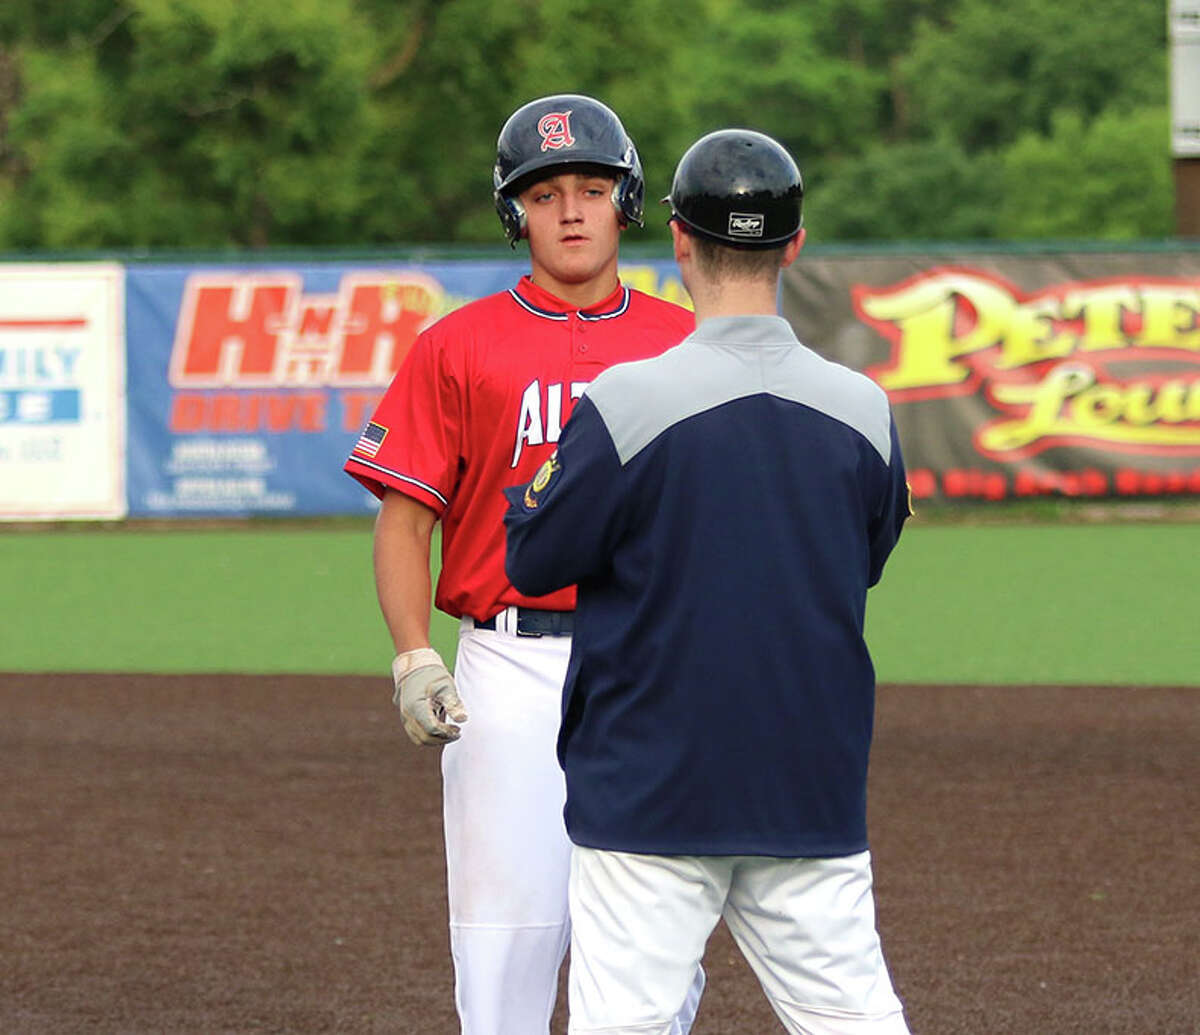 Alton Legion's Tyler Robinson (left) looks to assistant coach Chris Ford after Robinson's single against Maryland Heights on Saturday night at Hopkins Field in Alton.